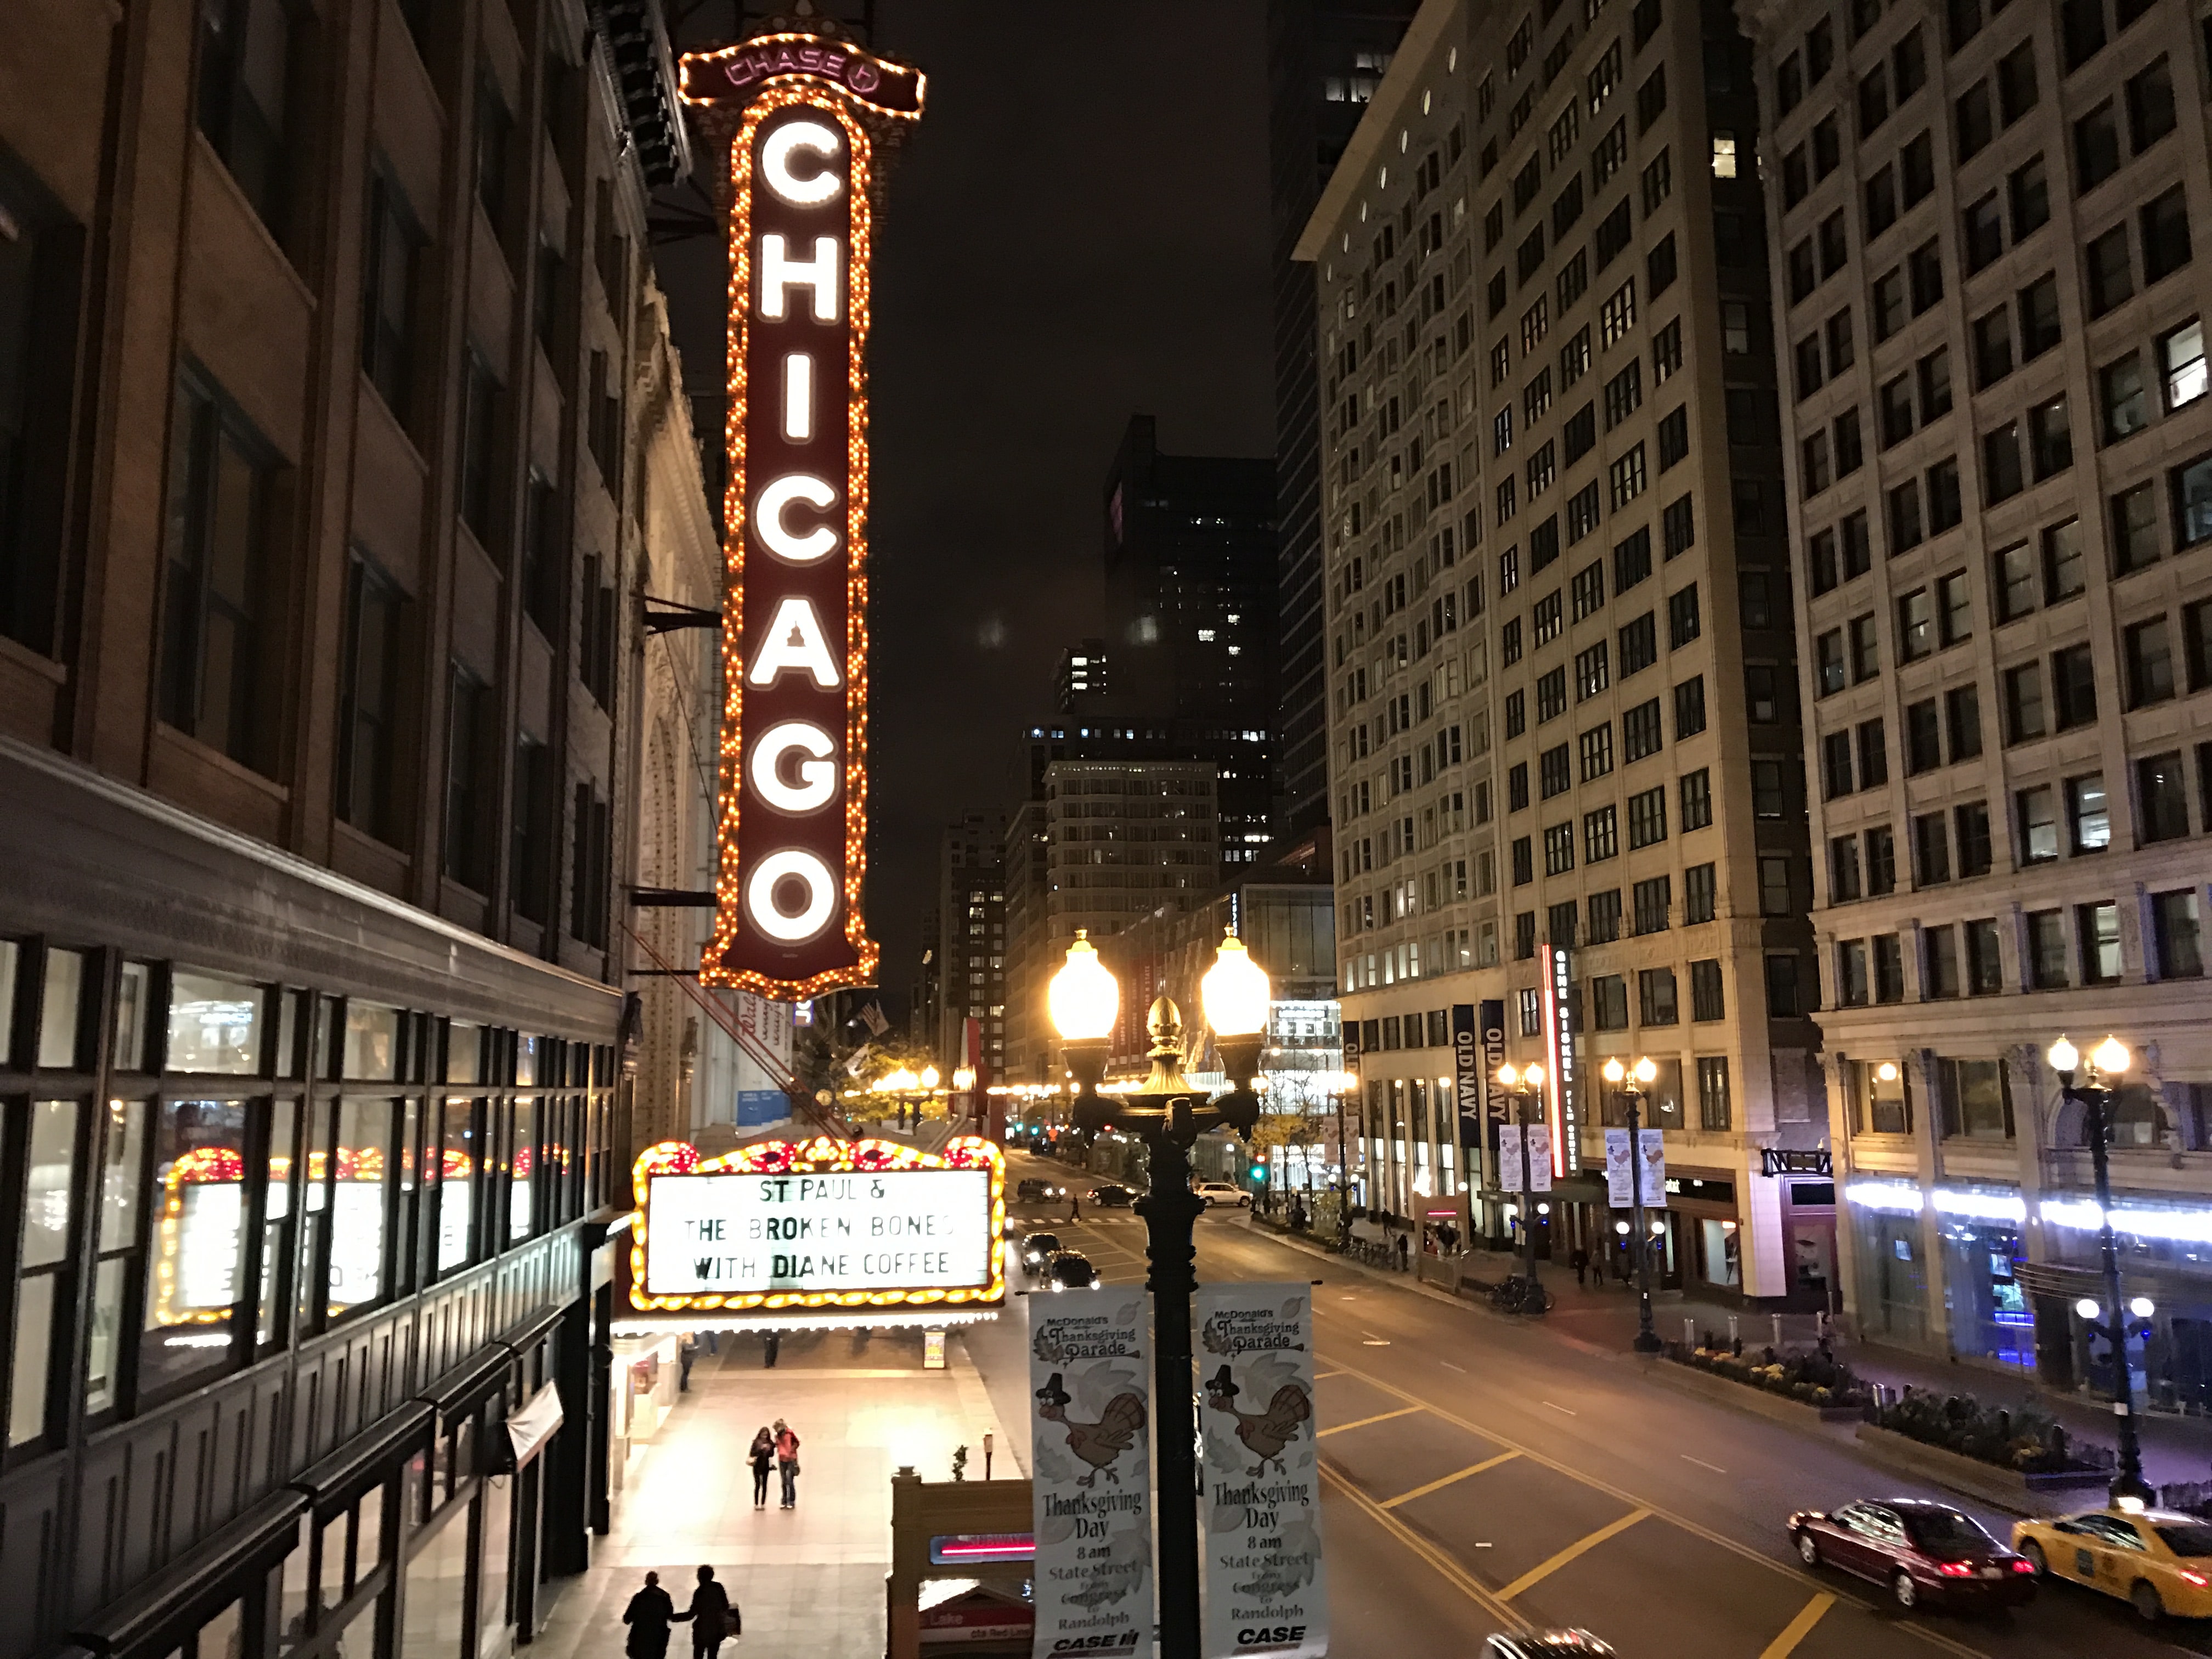 13 things you didn't know about chicago